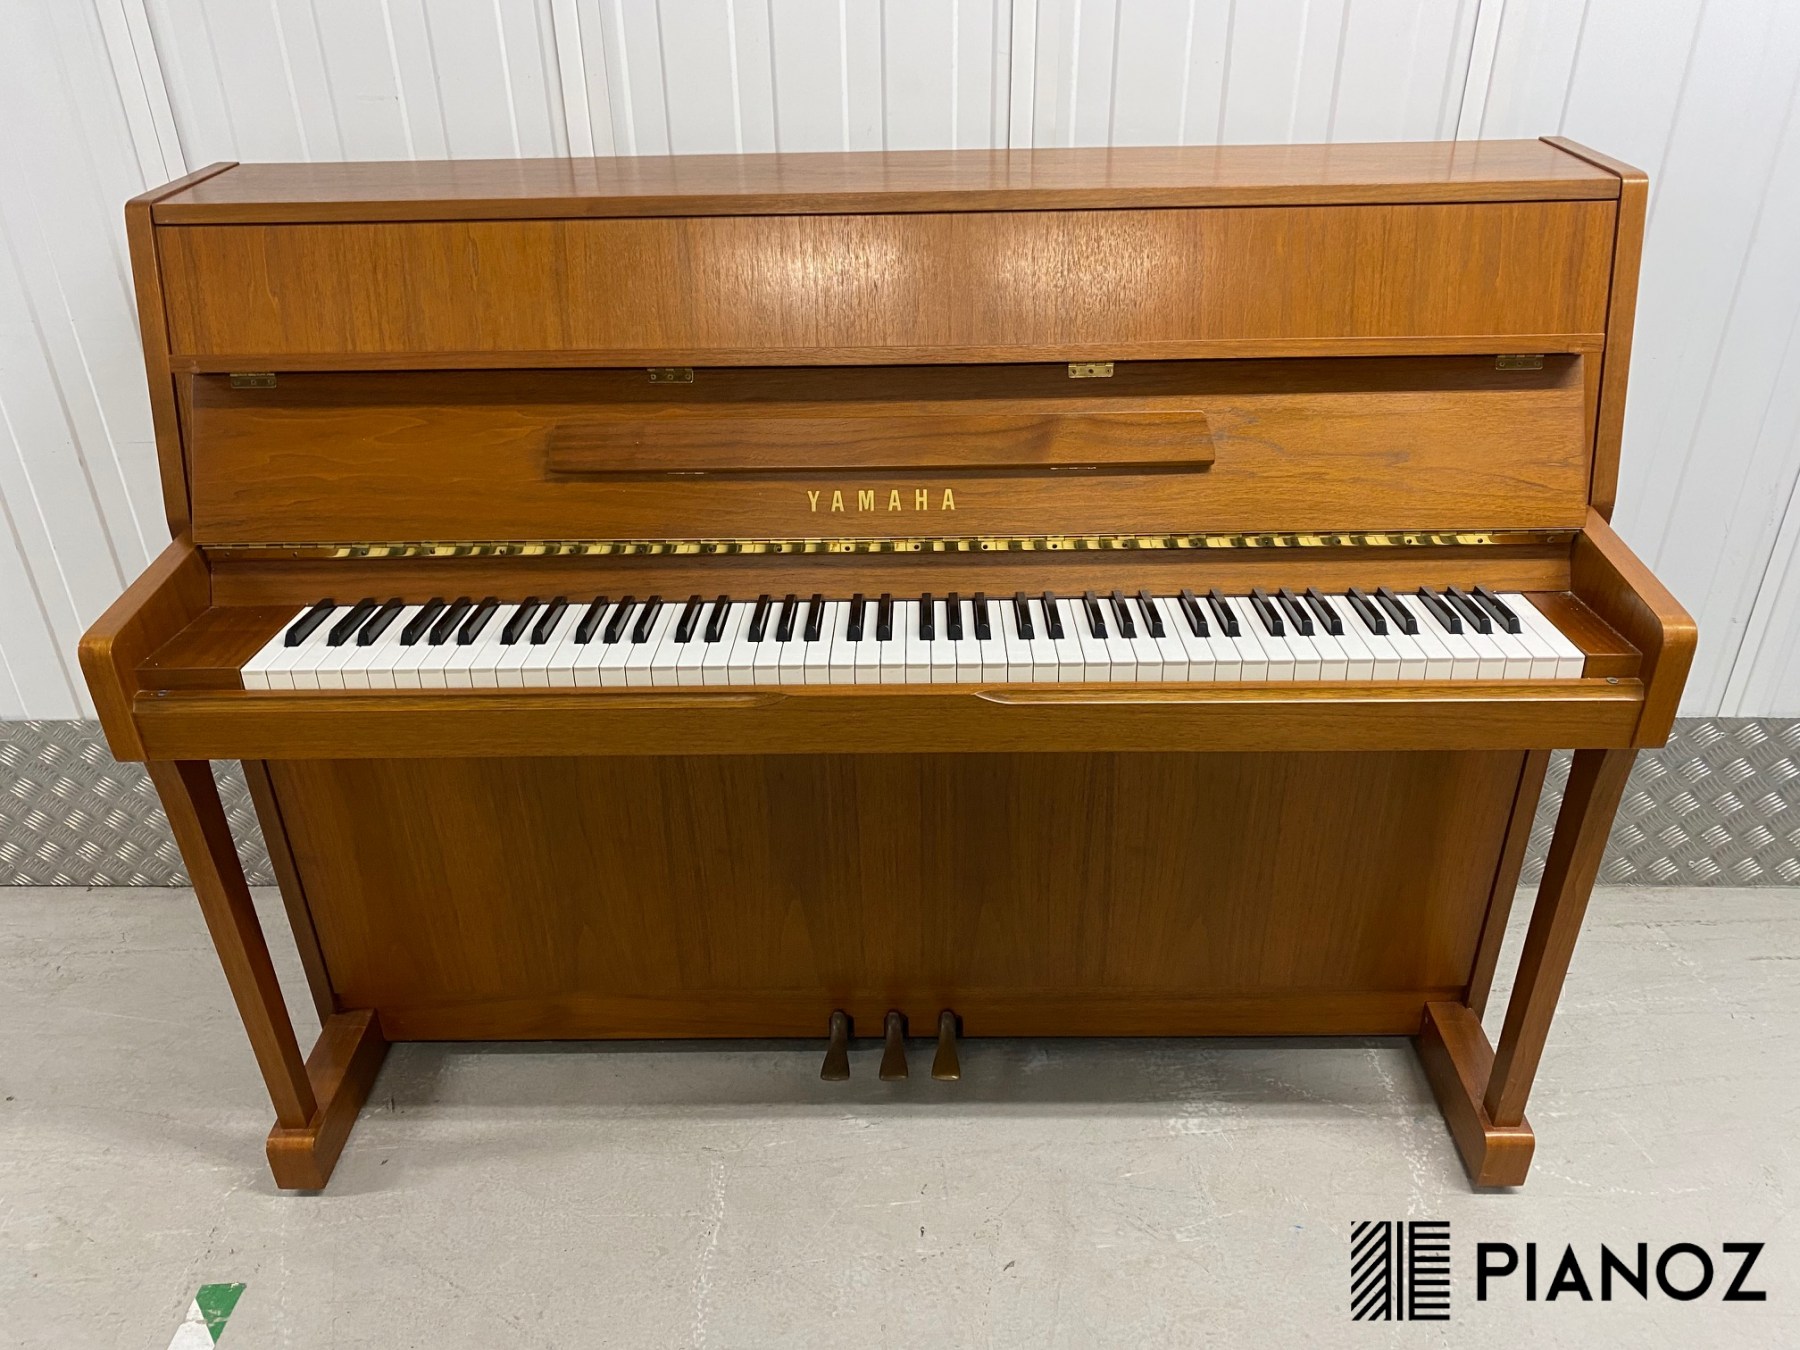 Yamaha M108 Japanese Upright Piano piano for sale in UK